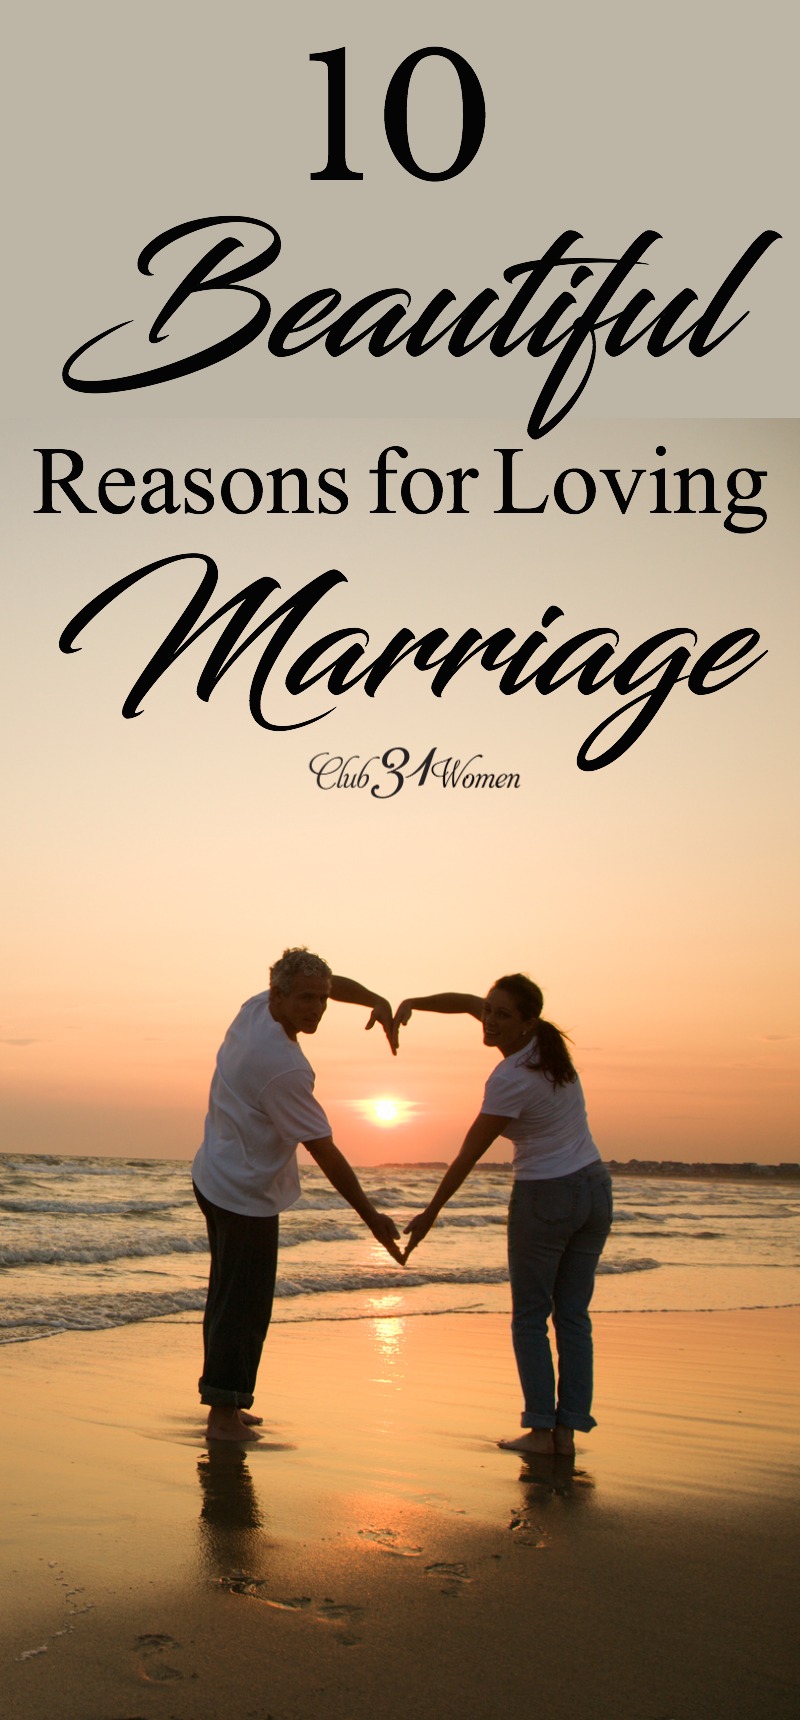 Marriage isn't only about a lot of hard work. It can be rich and lovely and satisfying too. Here are 10 beautiful reasons you can love marriage too! via @Club31Women